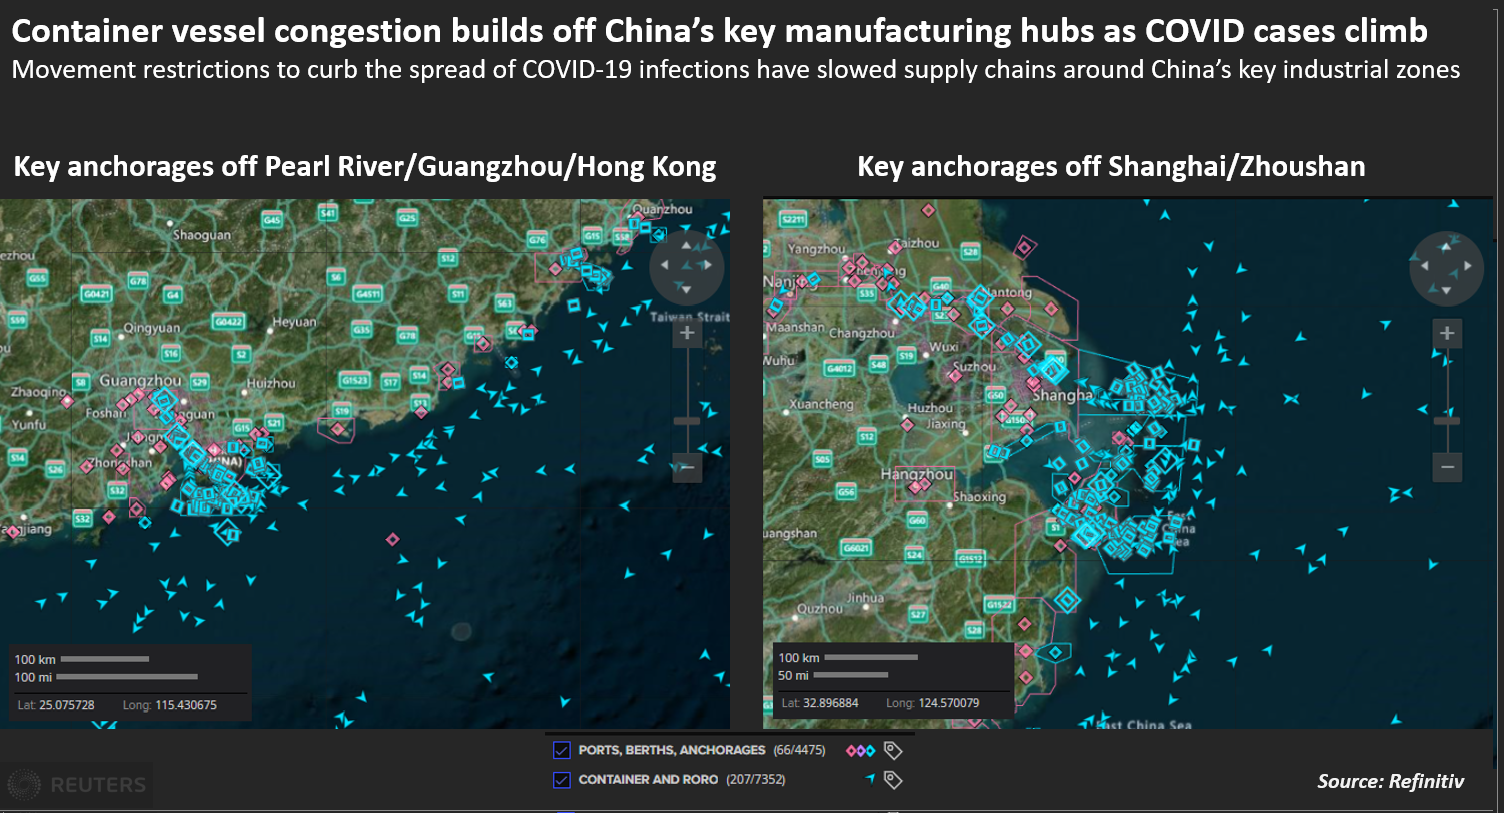 Container vessel congestion builds off China’s key manufacturing hubs as COVID cases climb